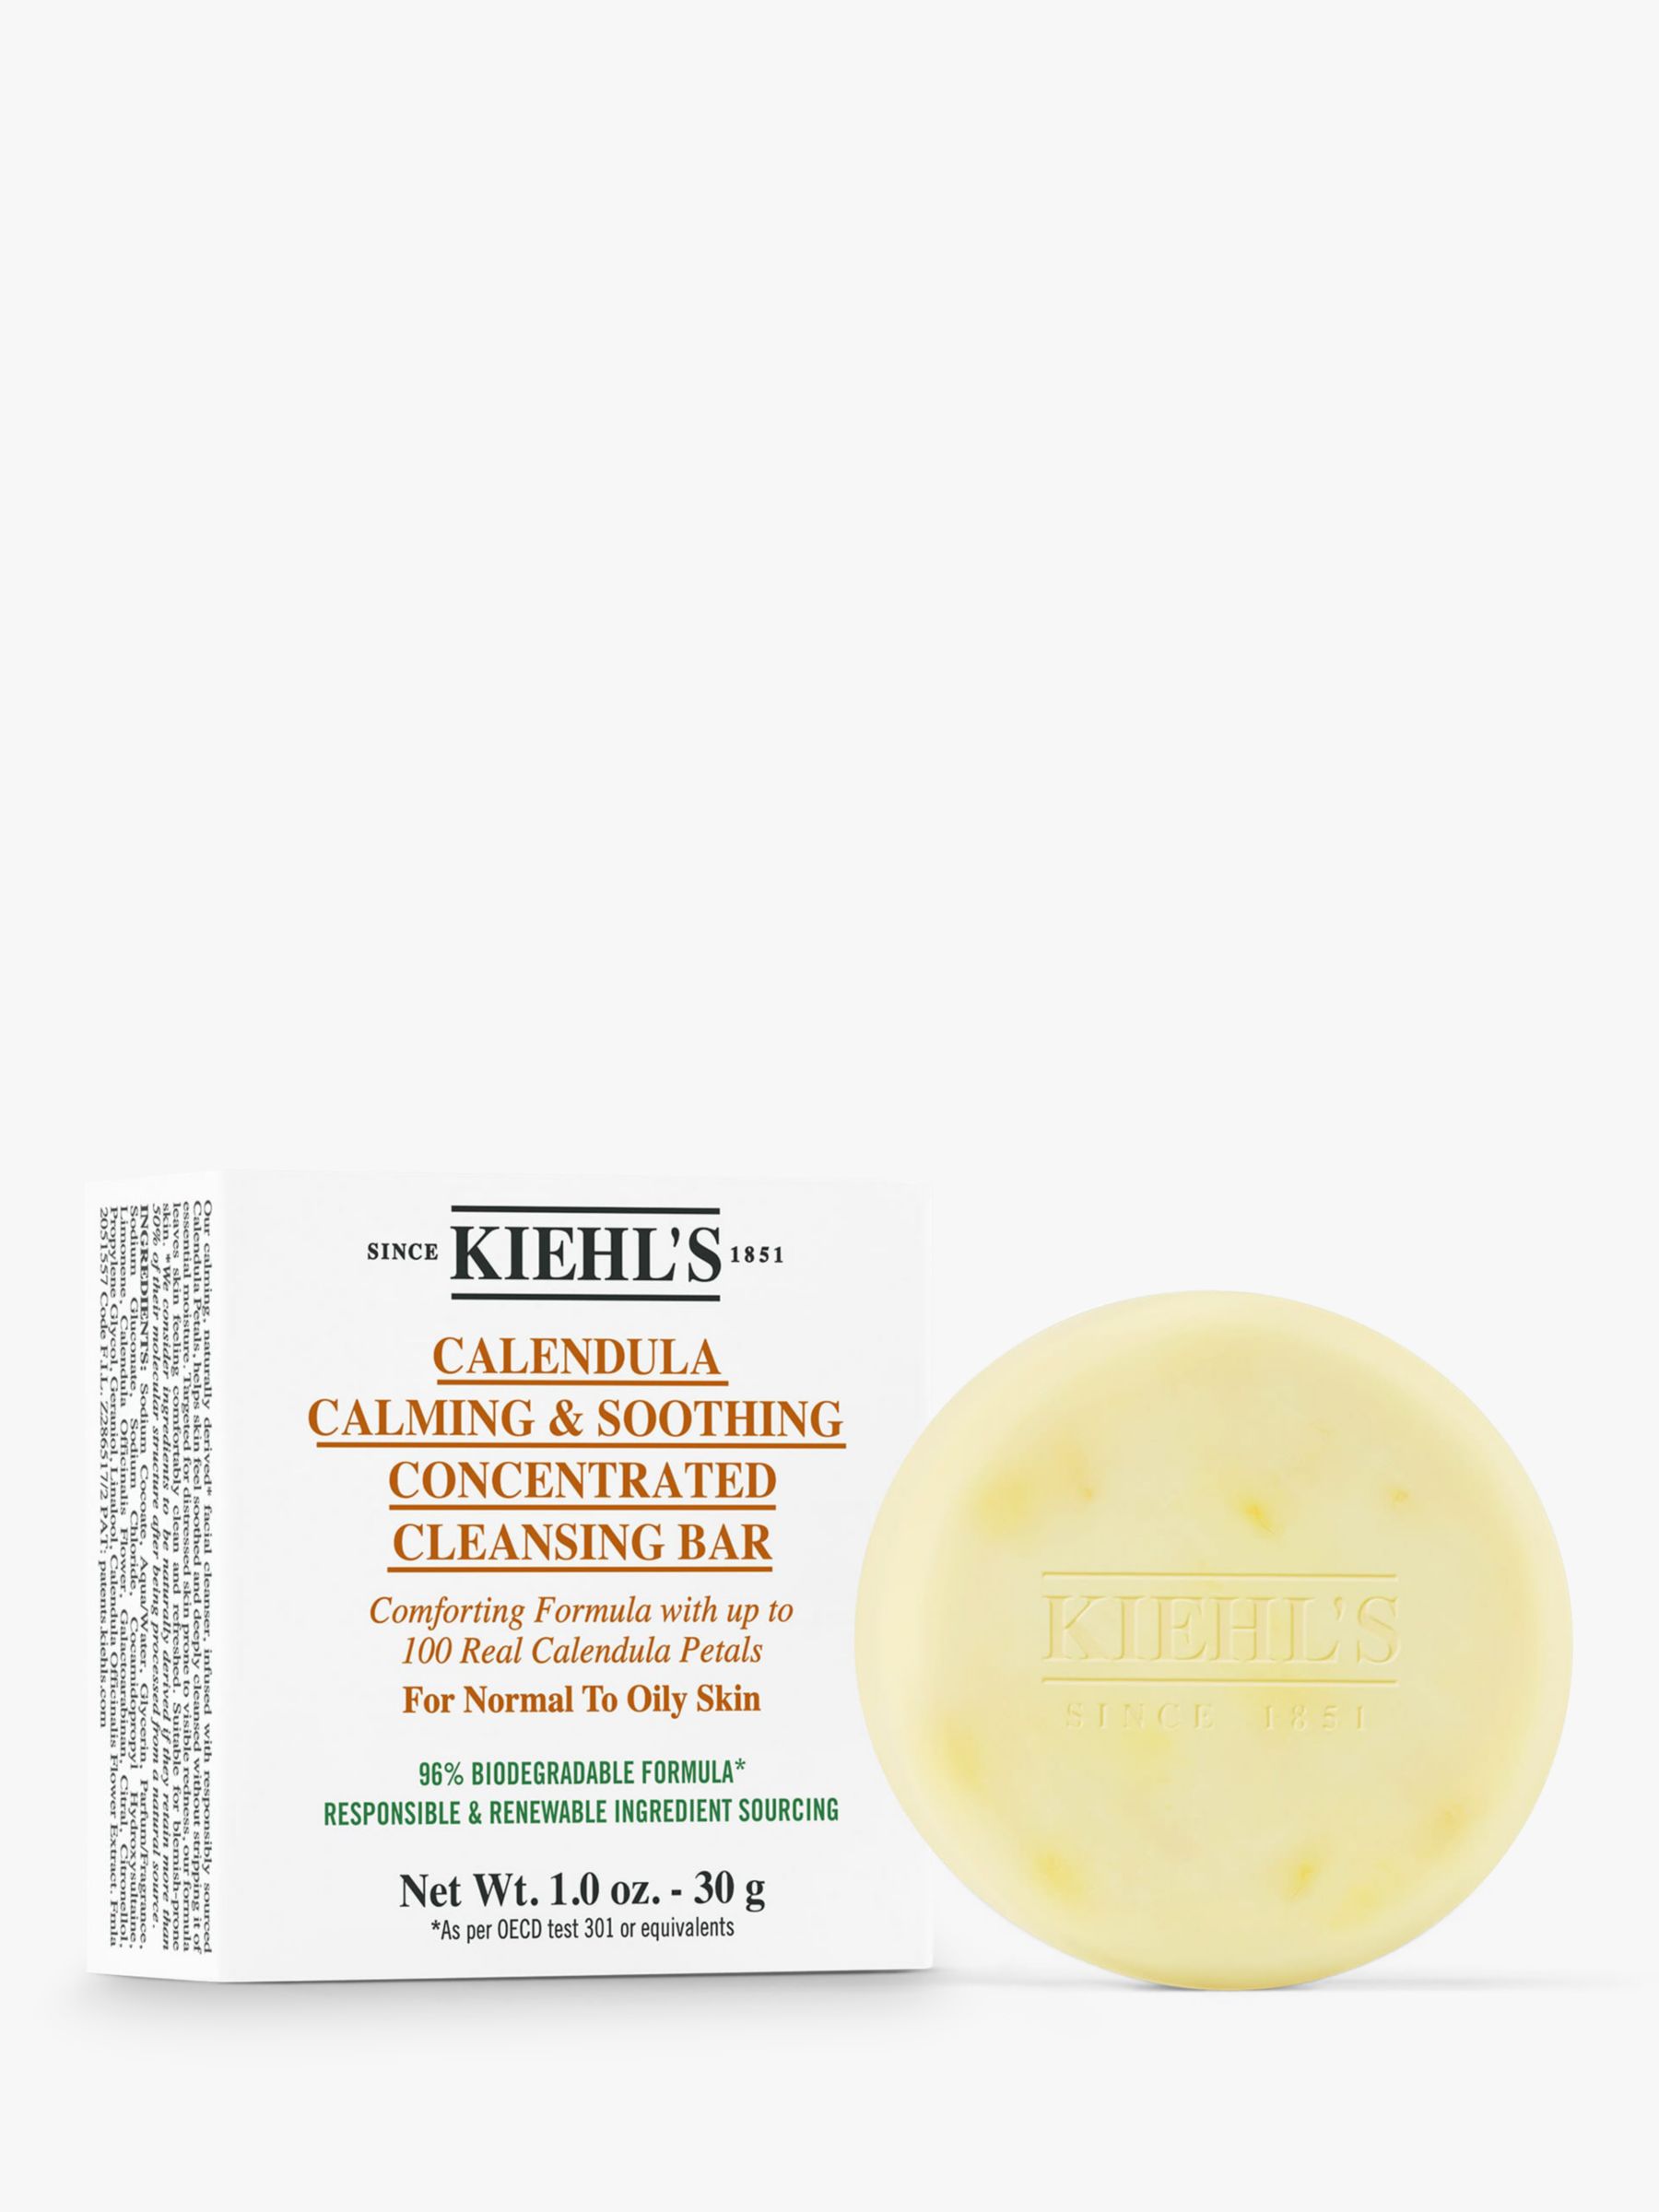 Kiehl's Calendula Calming & Soothing Concentrated Cleansing Bar, 30g 2